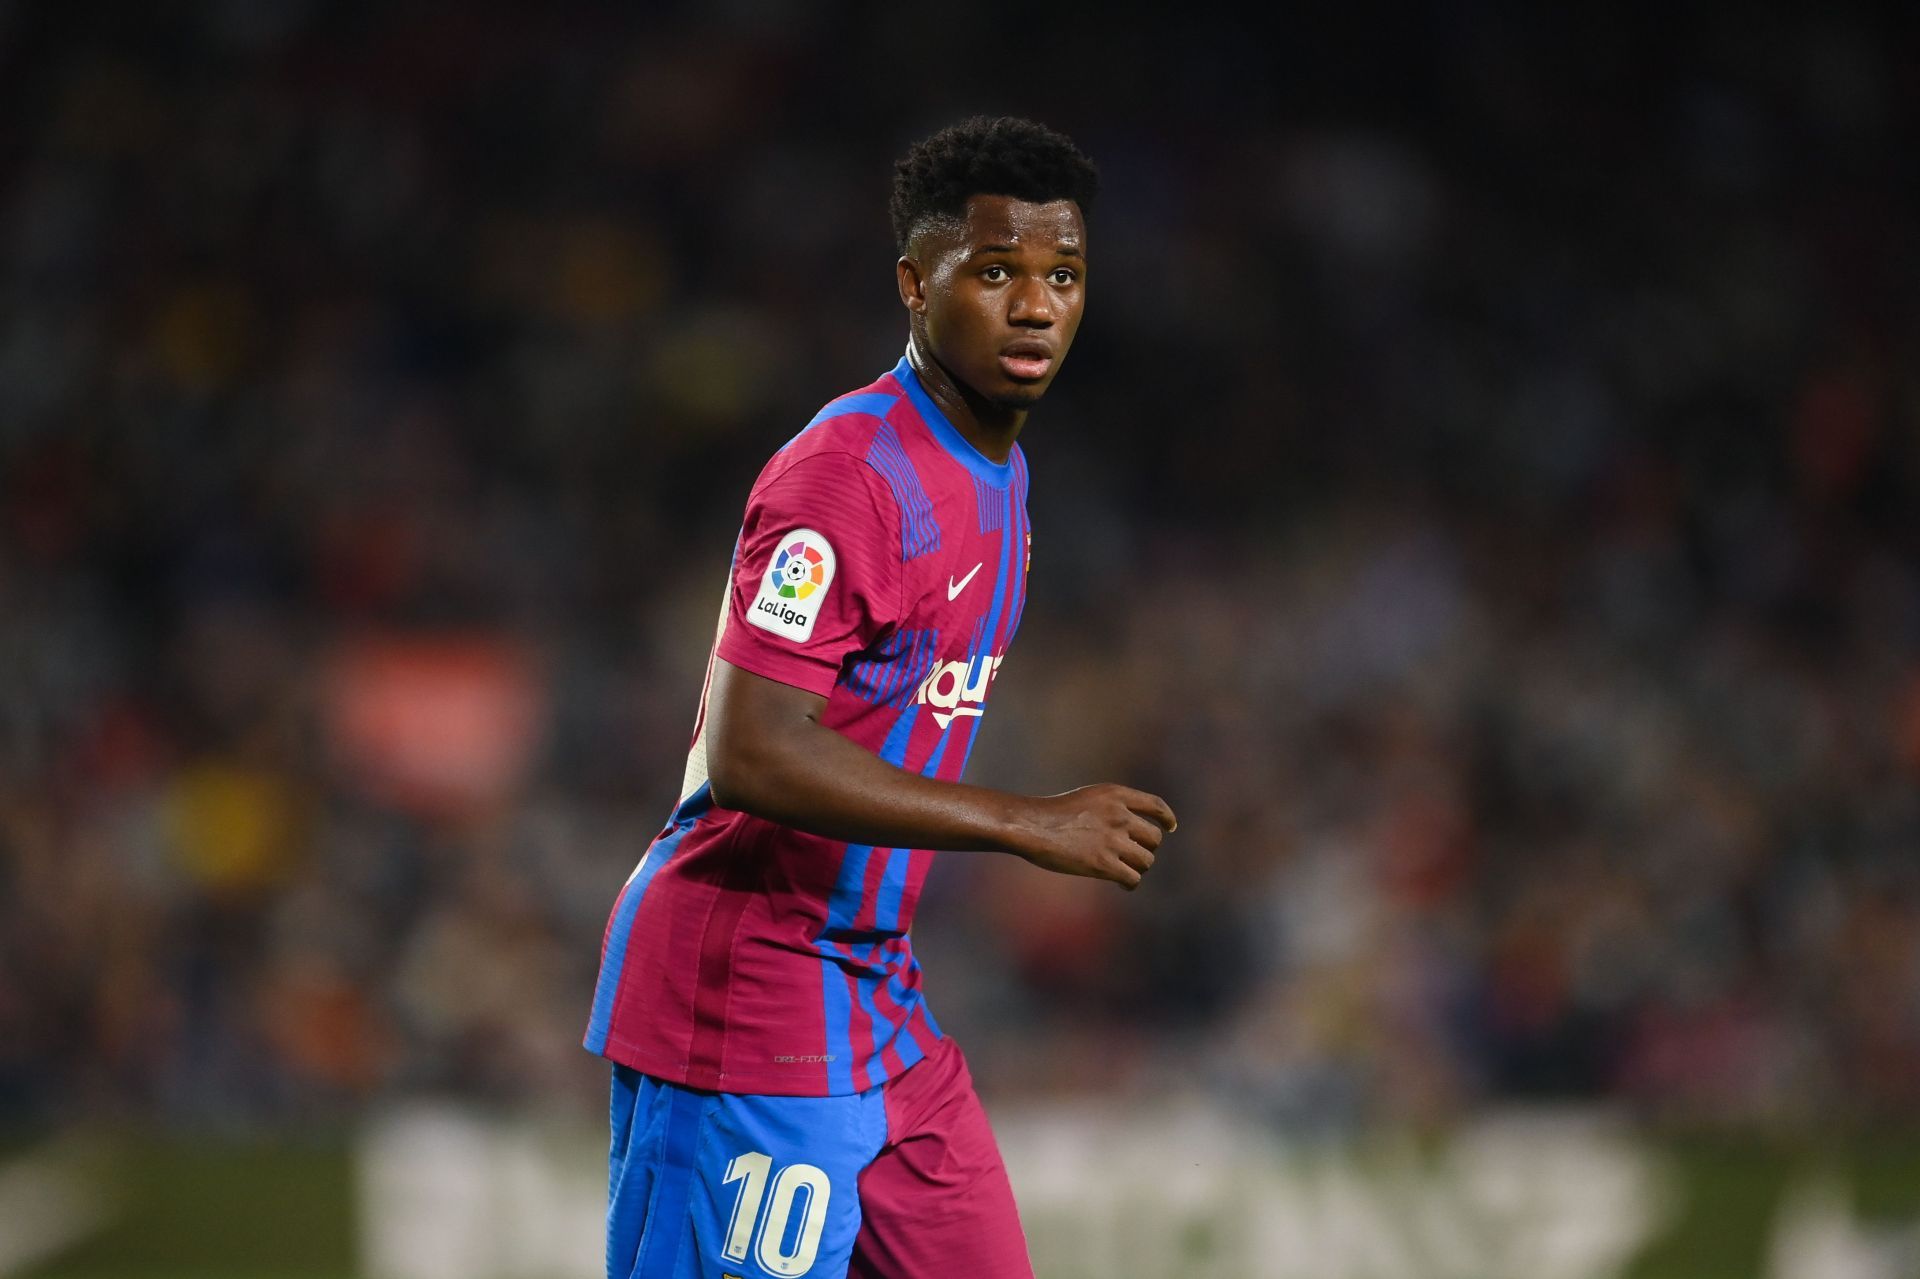 Ansu Fati has earned praise from many for his impressive performances in the Barcelona jersey